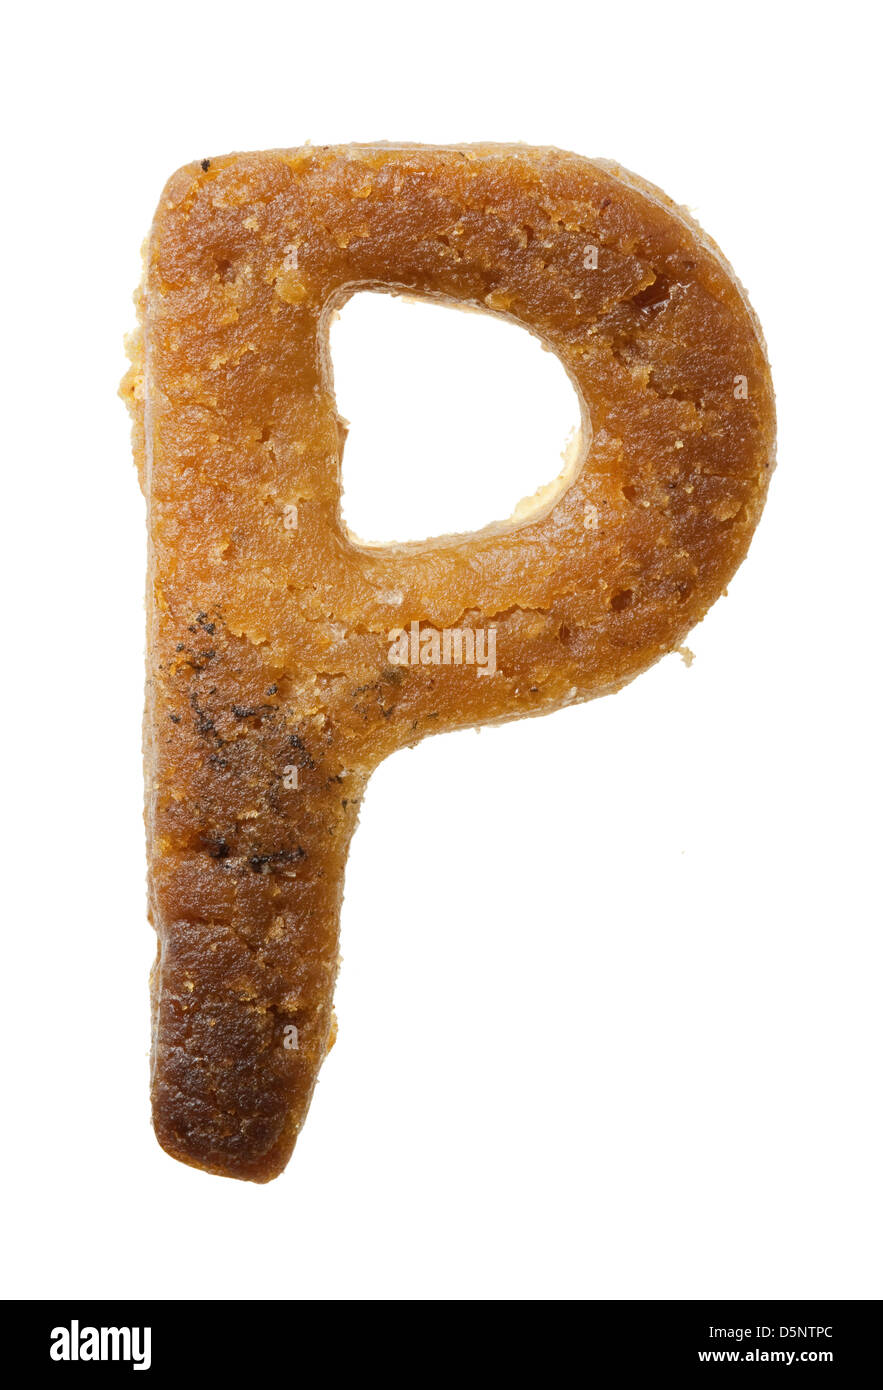 Baked alphabet cookie letter P Stock Photo